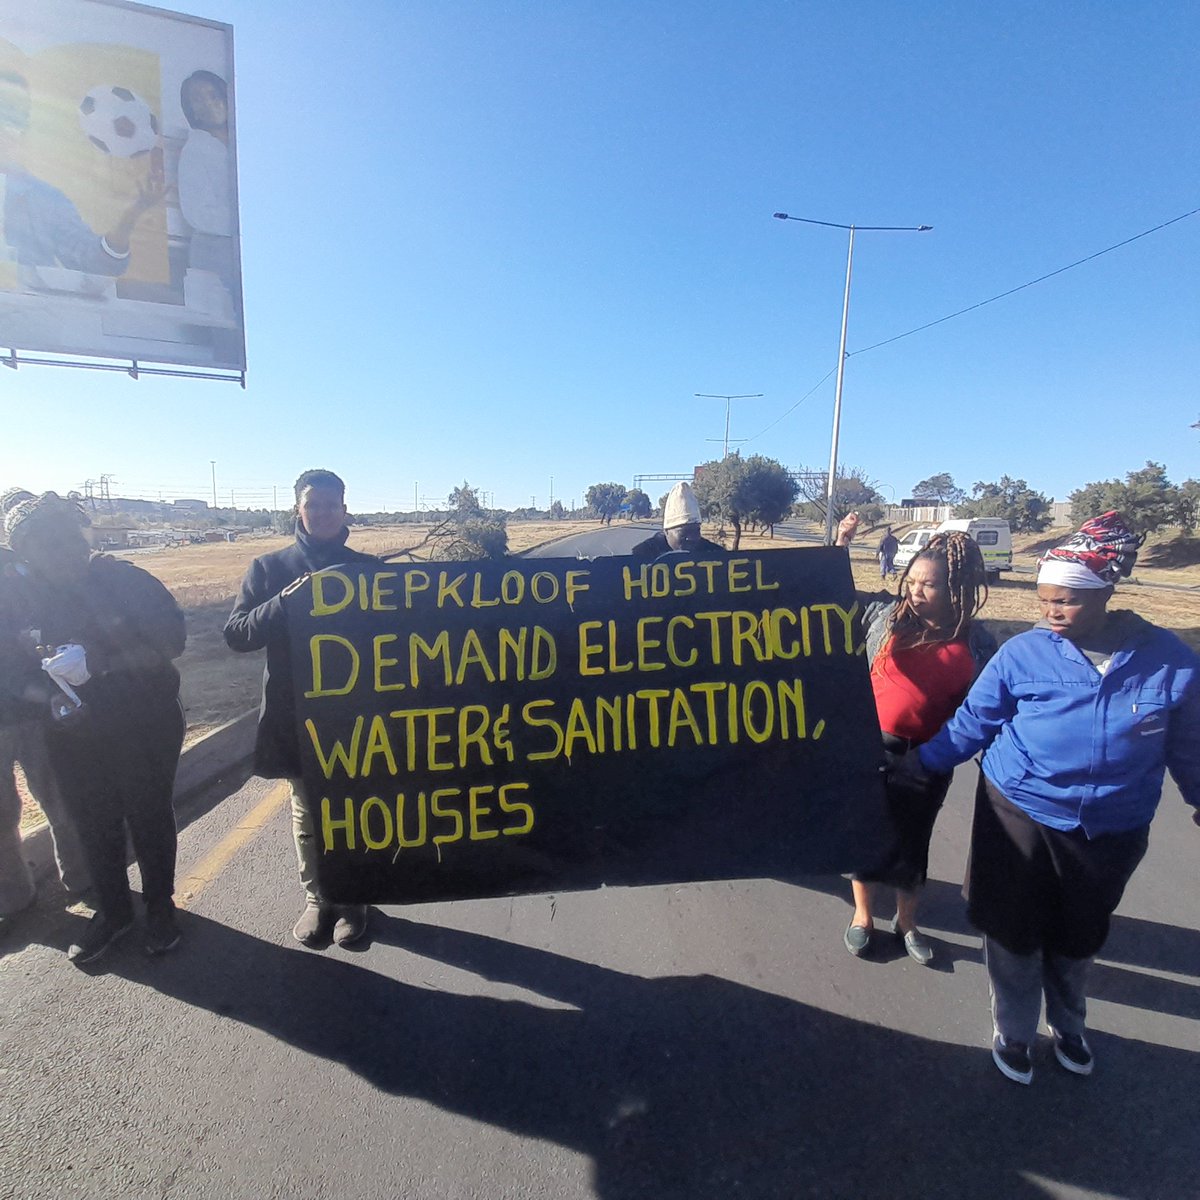 #DiepkloofProtest Some of the residents of Diepkloof Hostel in Soweto carrying a banner demanding electricity among other things. Traffic in the area including along the N1 and N12 has been affected @TeamNews24